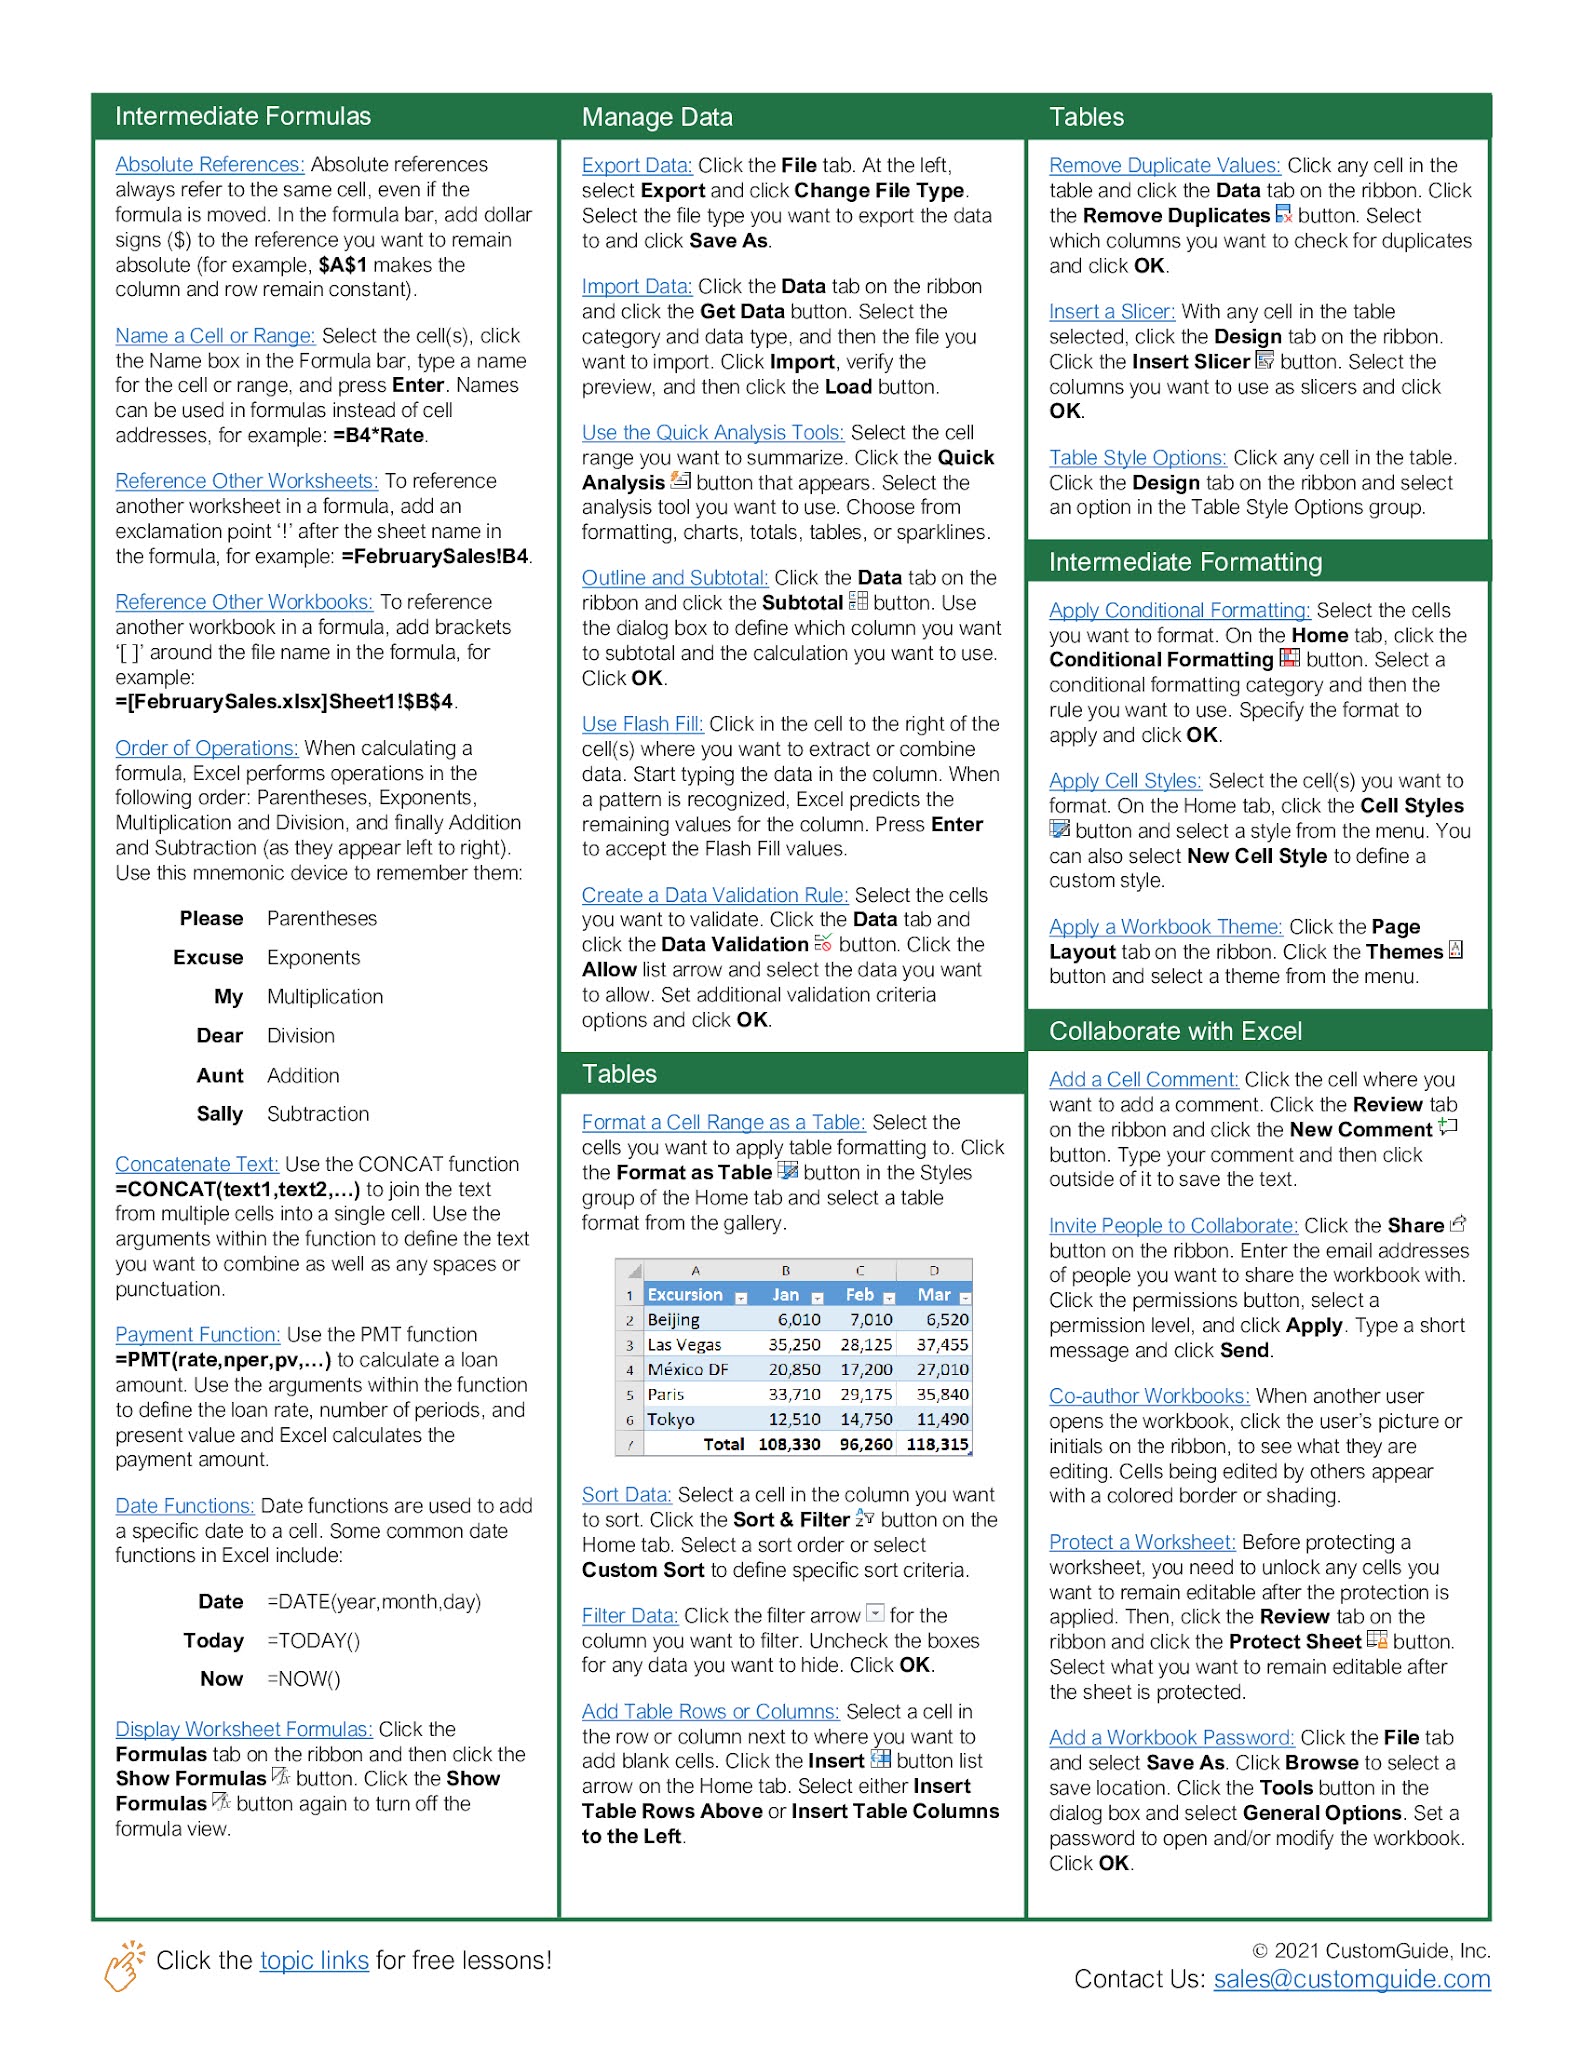 Vba For Excel Cheat Sheet Excel Cheat Sheet Excel Shortcuts Excel - Riset